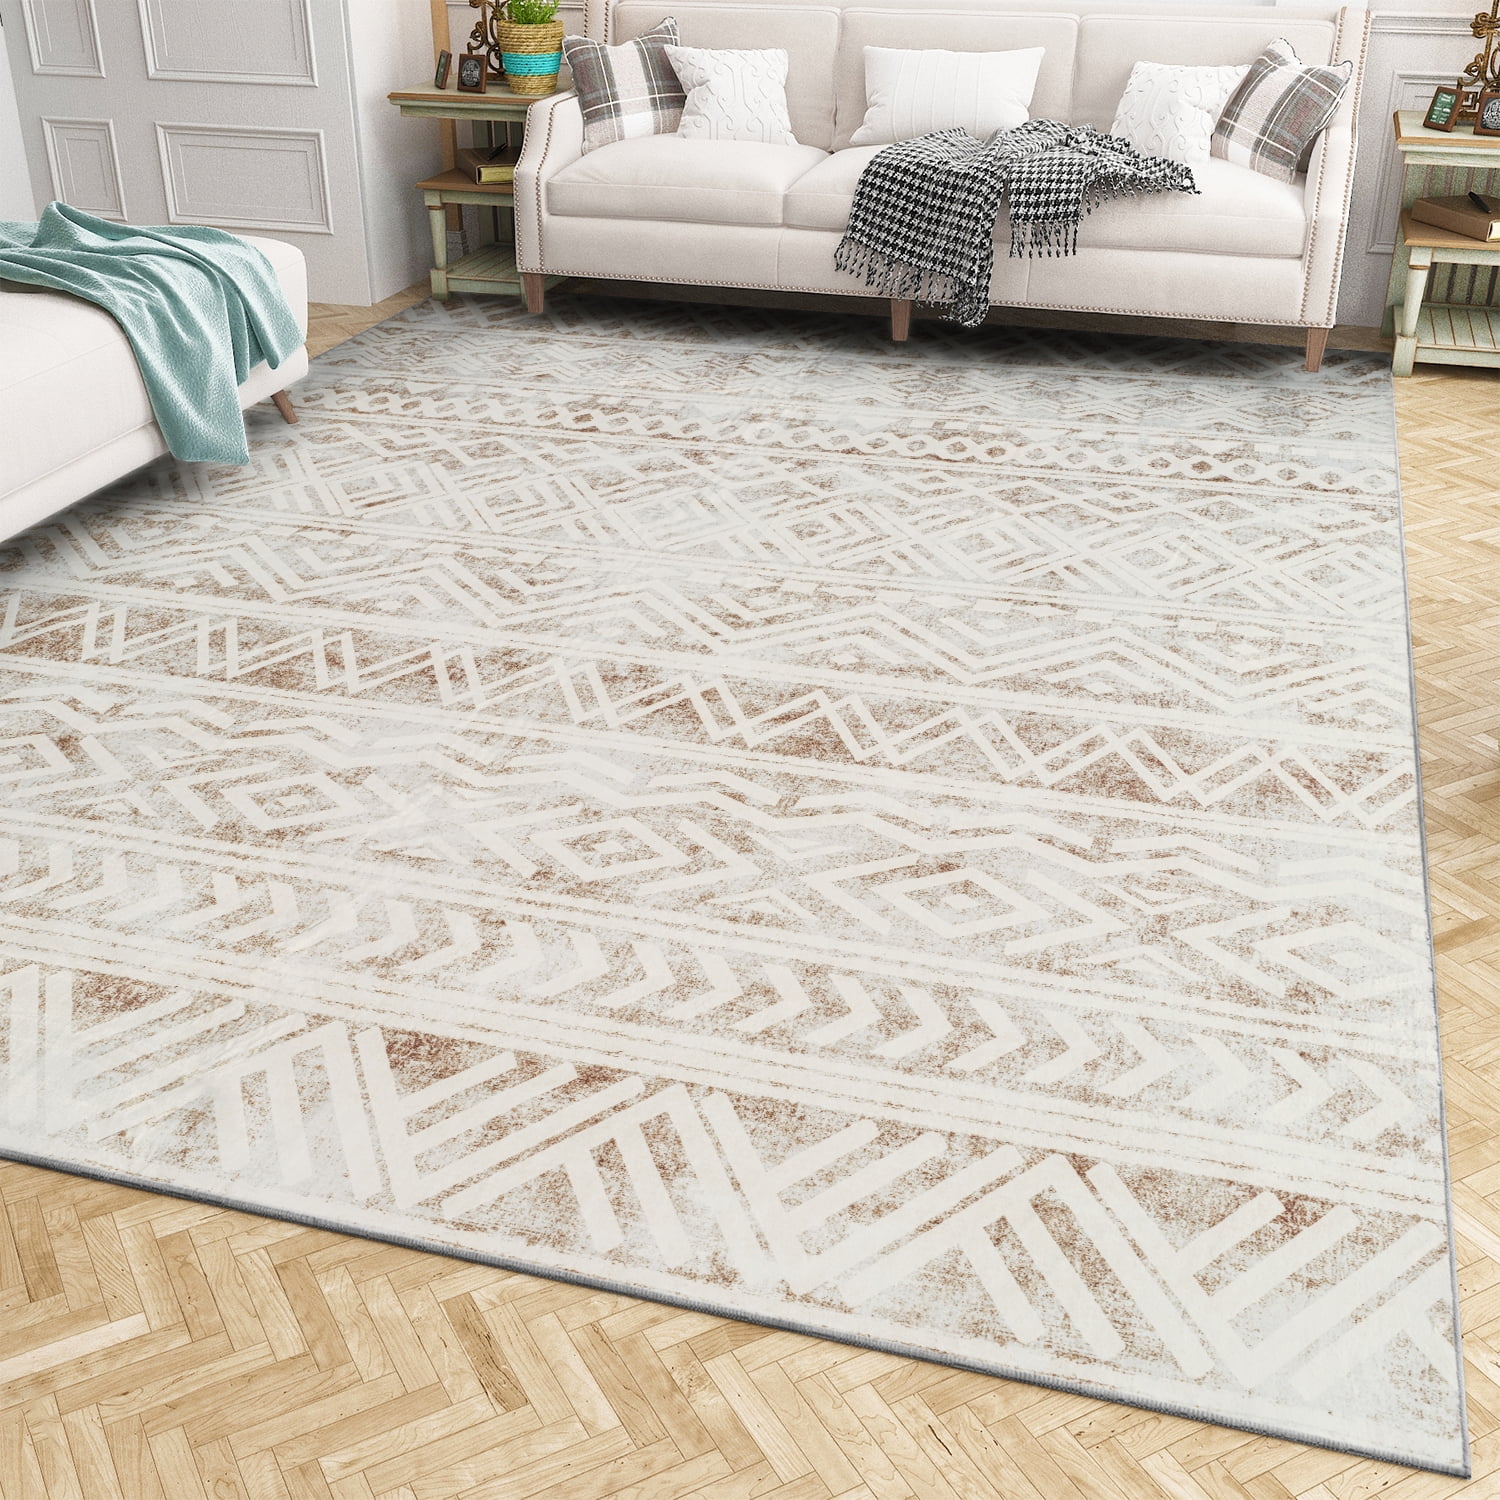 Boho Area Rug 3x4 for Bedroom Living Room - Modern Carpet for Room Decor,  Abstract Printed Floor Rugs for Home Decorative, Washable & Non Slip & Soft